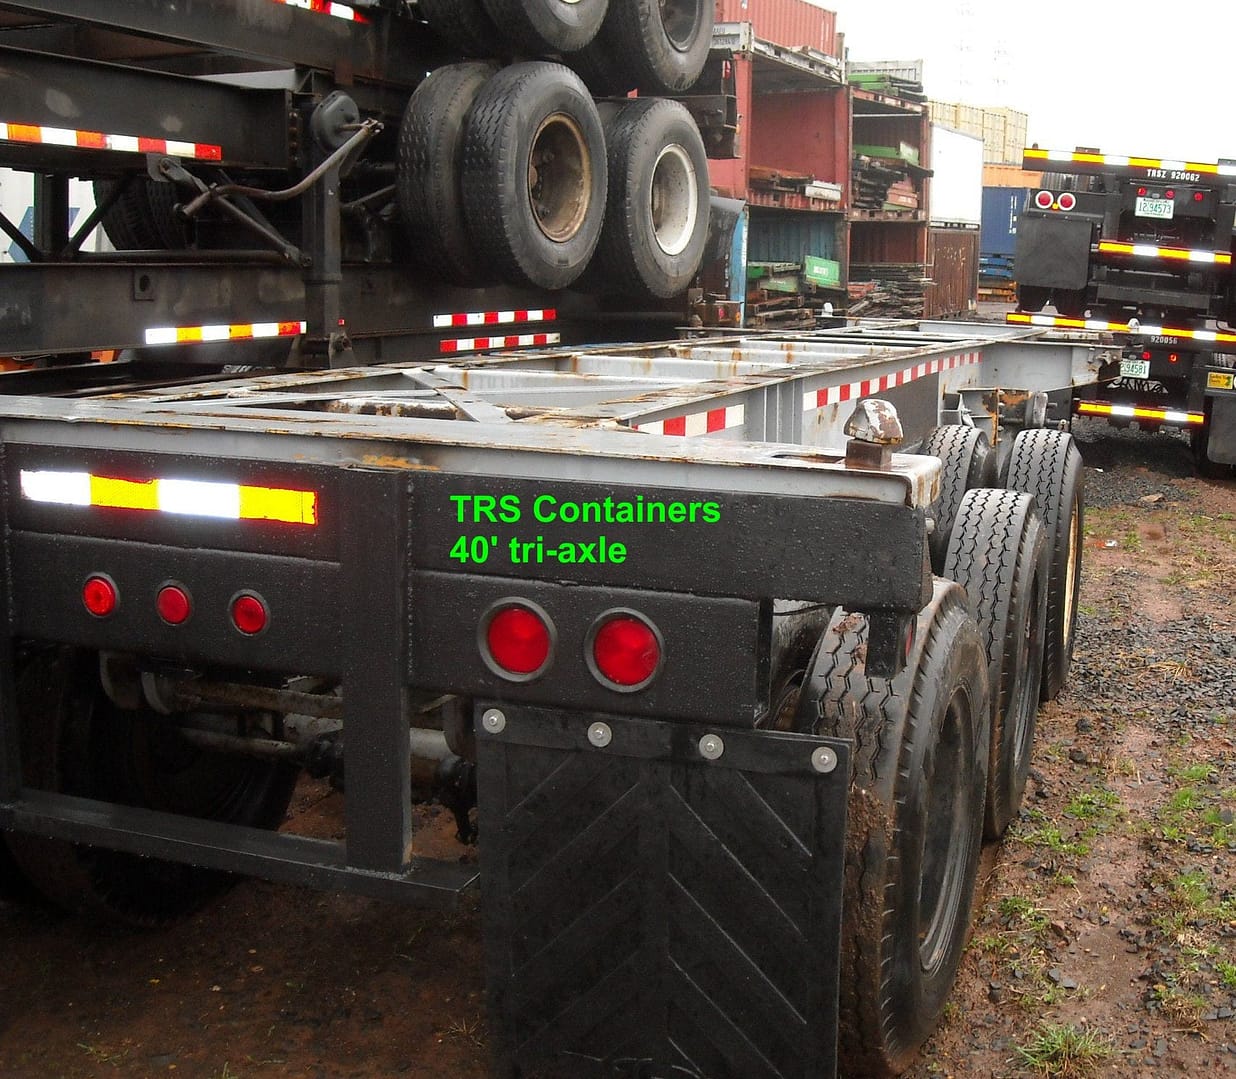 TRS Containers sells rents repairs regsiters stacks and trucks 40 foot tri-axle chassis